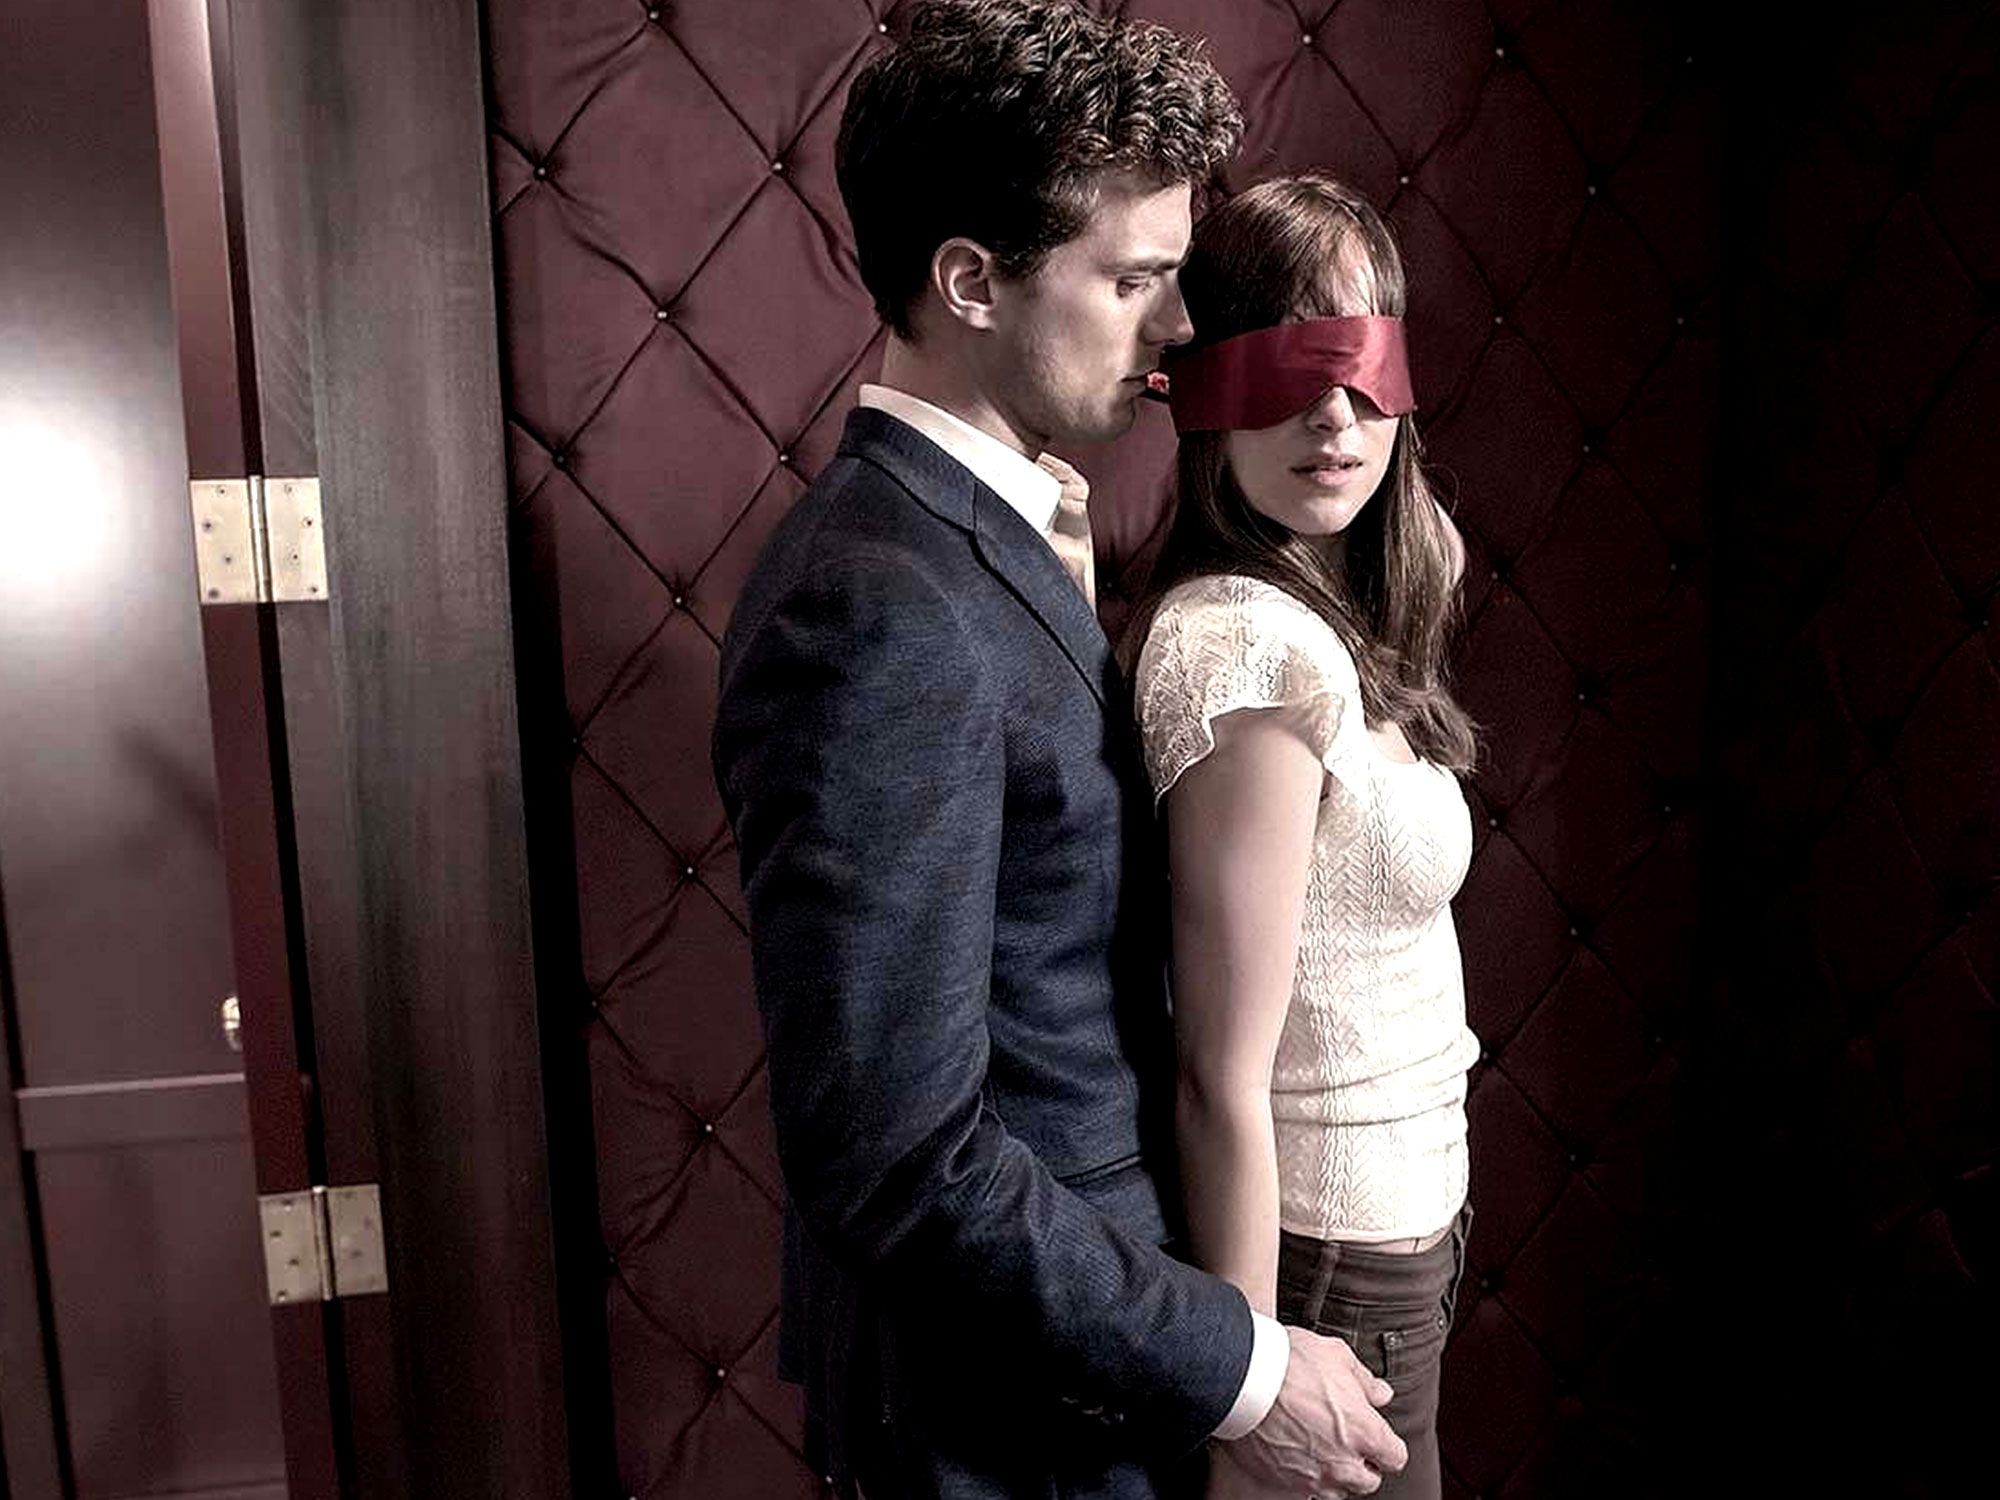 How to Watch Fifty Shades Darker on Netflix - Best VPNs to Use